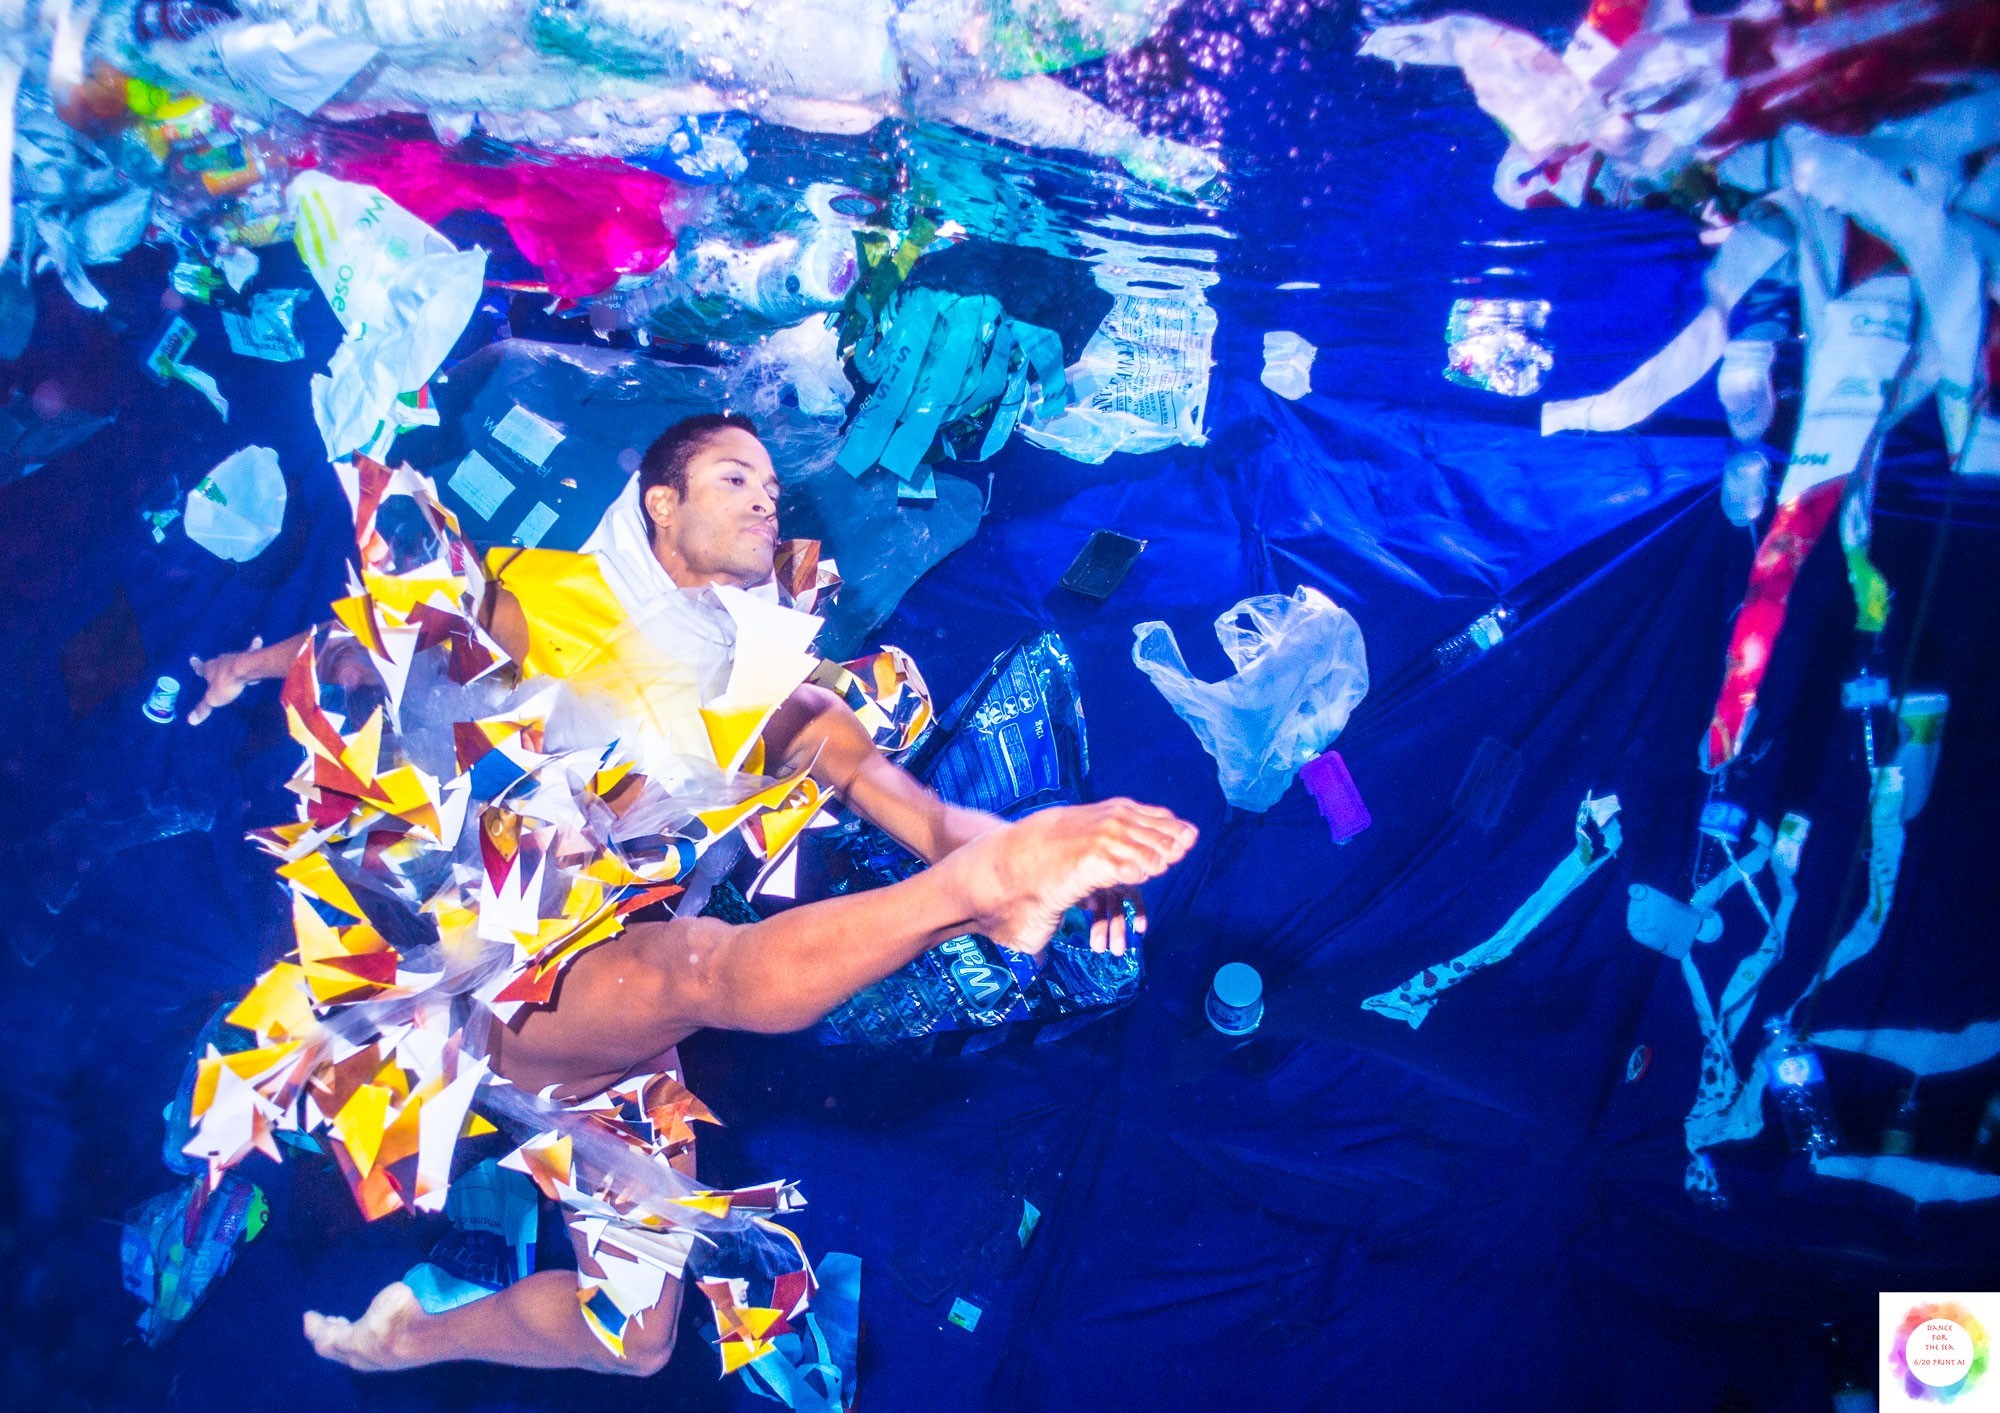 Royal Ballet soloist Fernando Montaño in a new work called Dance for the Sea, which highlights the disastrous pollution of the worlds oceans and waterways by plastic